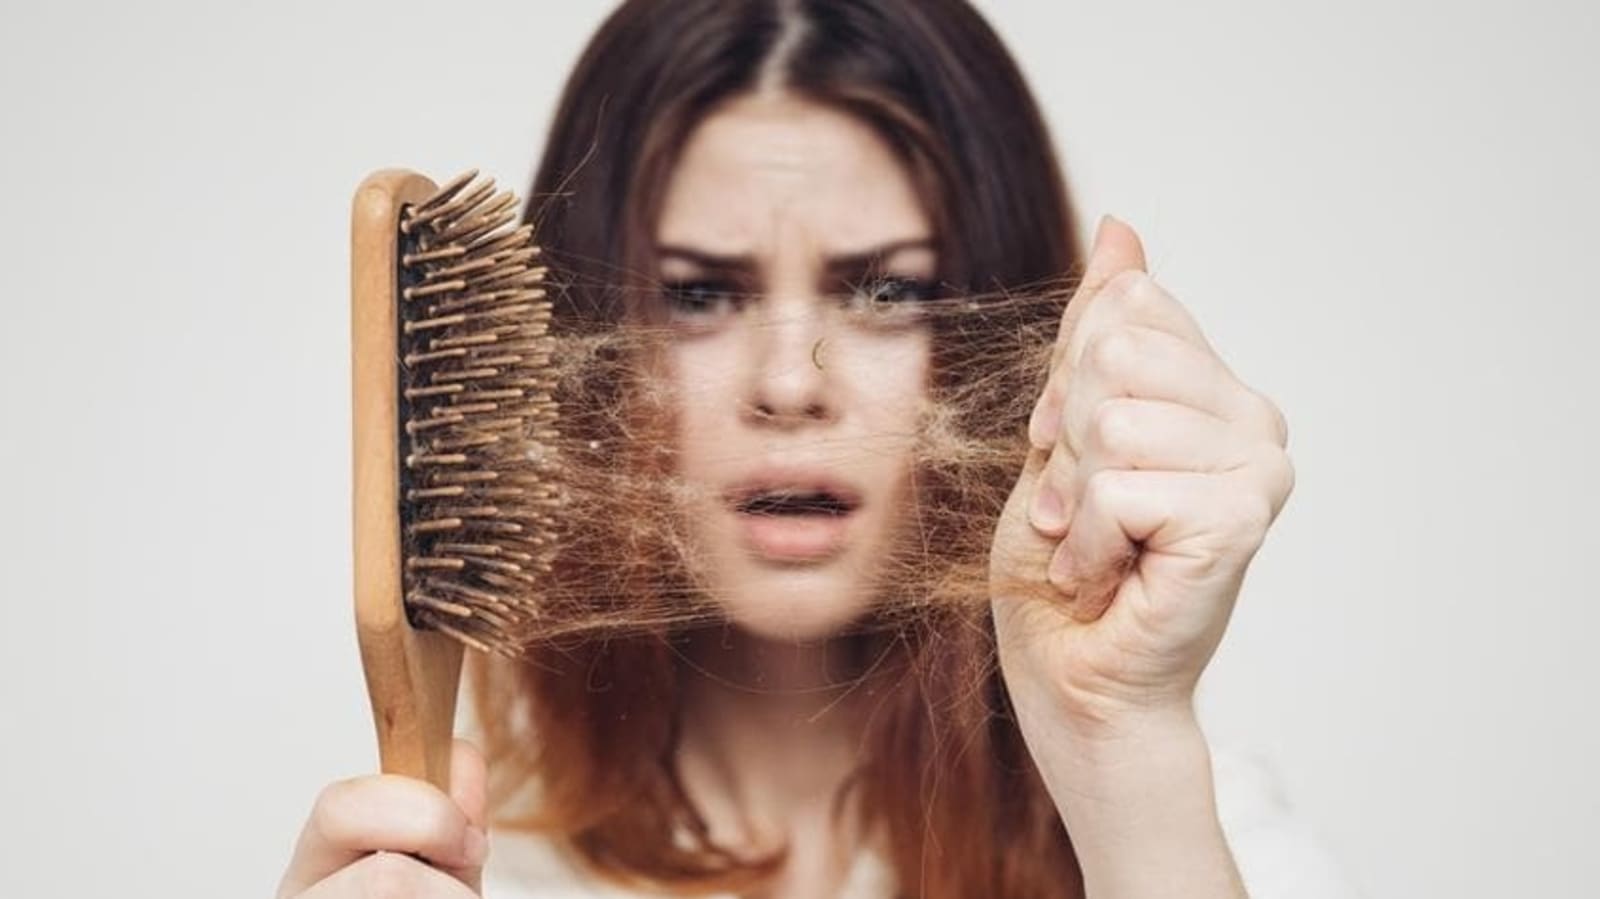 What Are The Medical Reason And Symptoms For Extreme Hair Loss